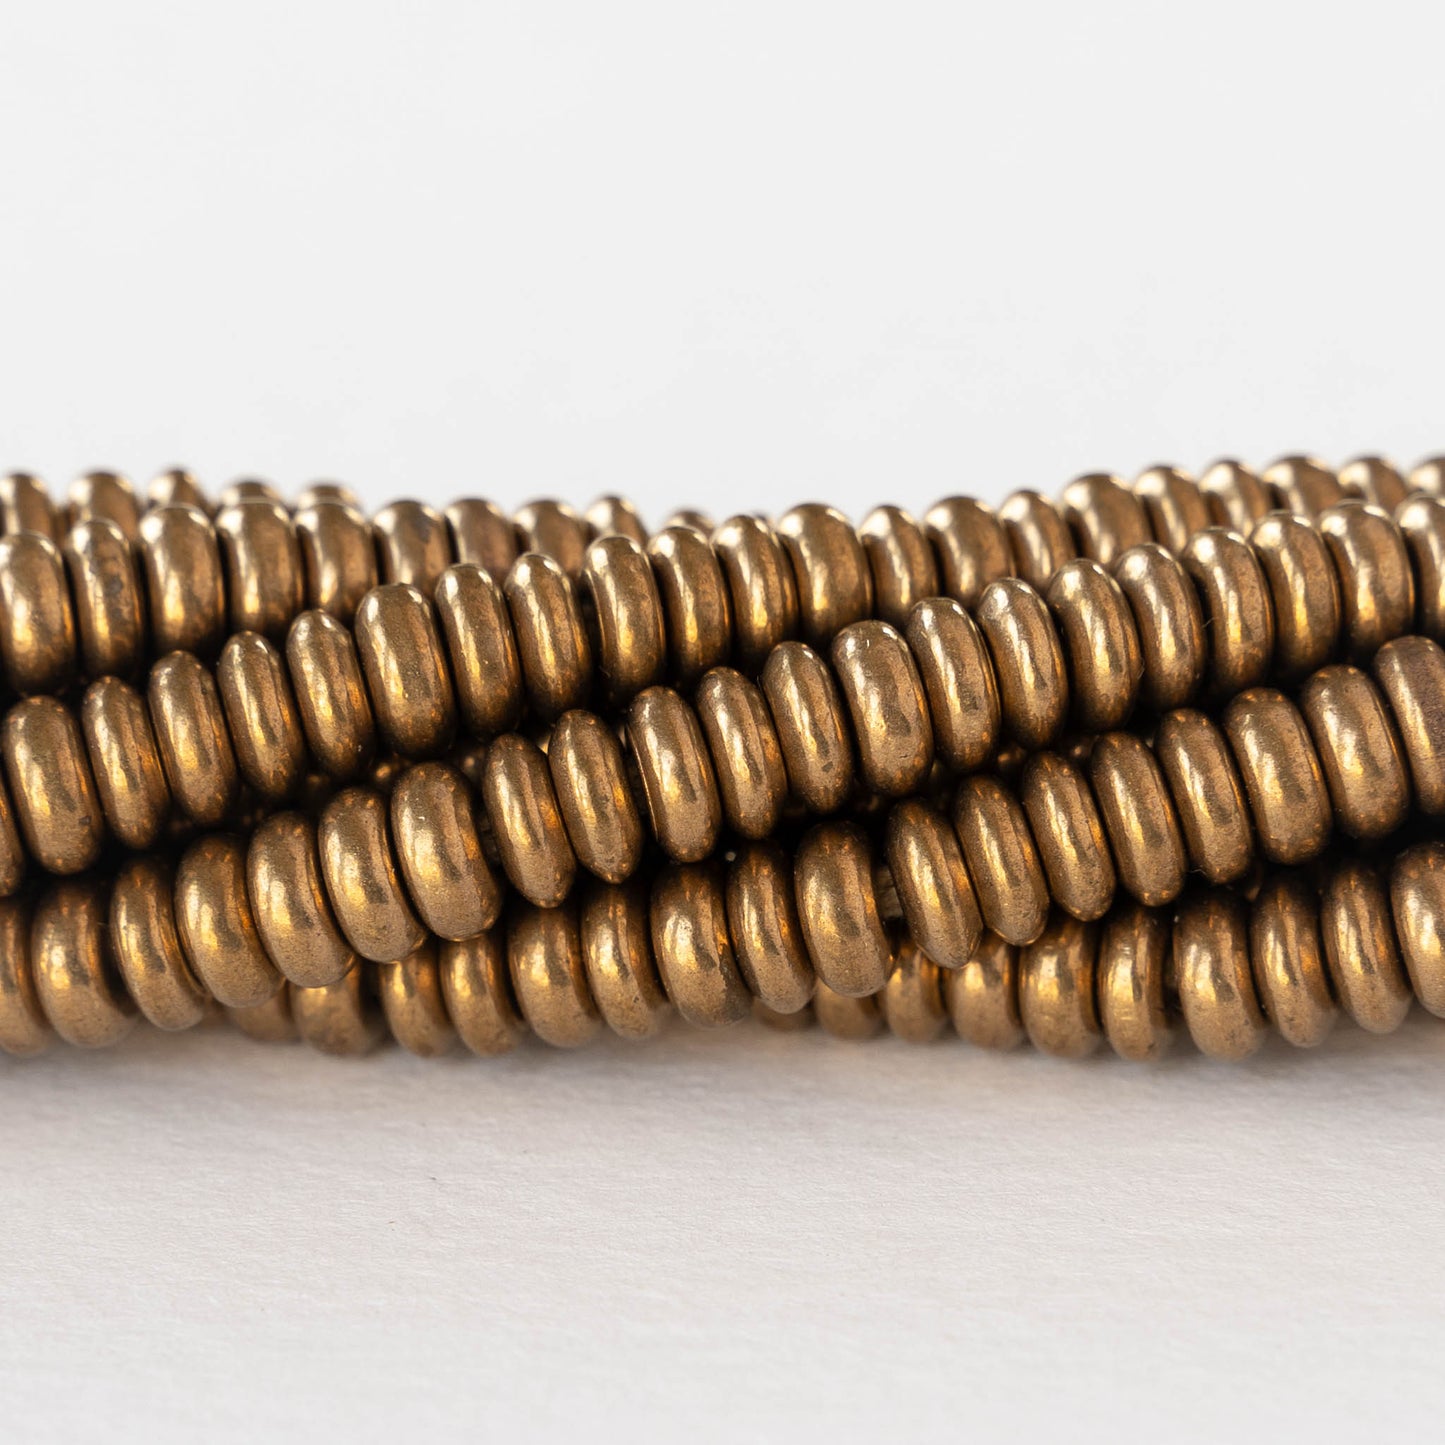 6.5mm Antique Gold Plated Brass Rondelle Beads - 40